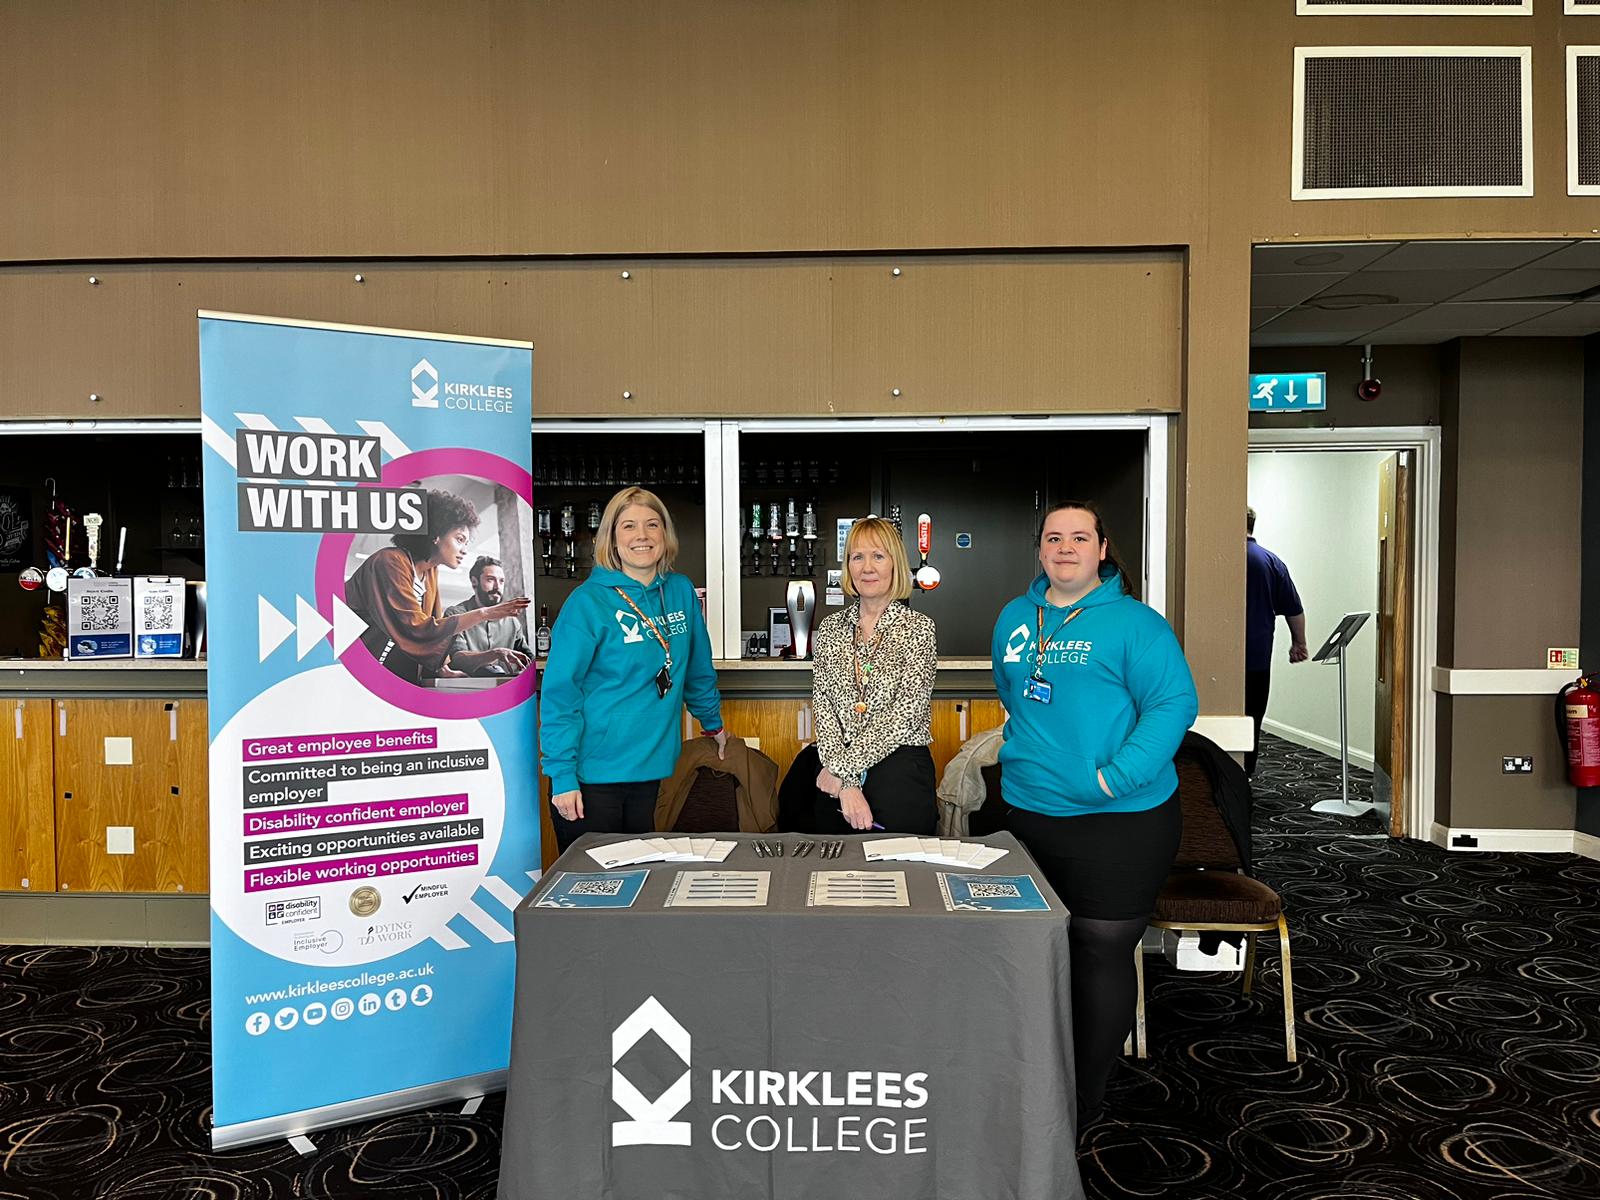 Kirklees College at our event in Huddersfield